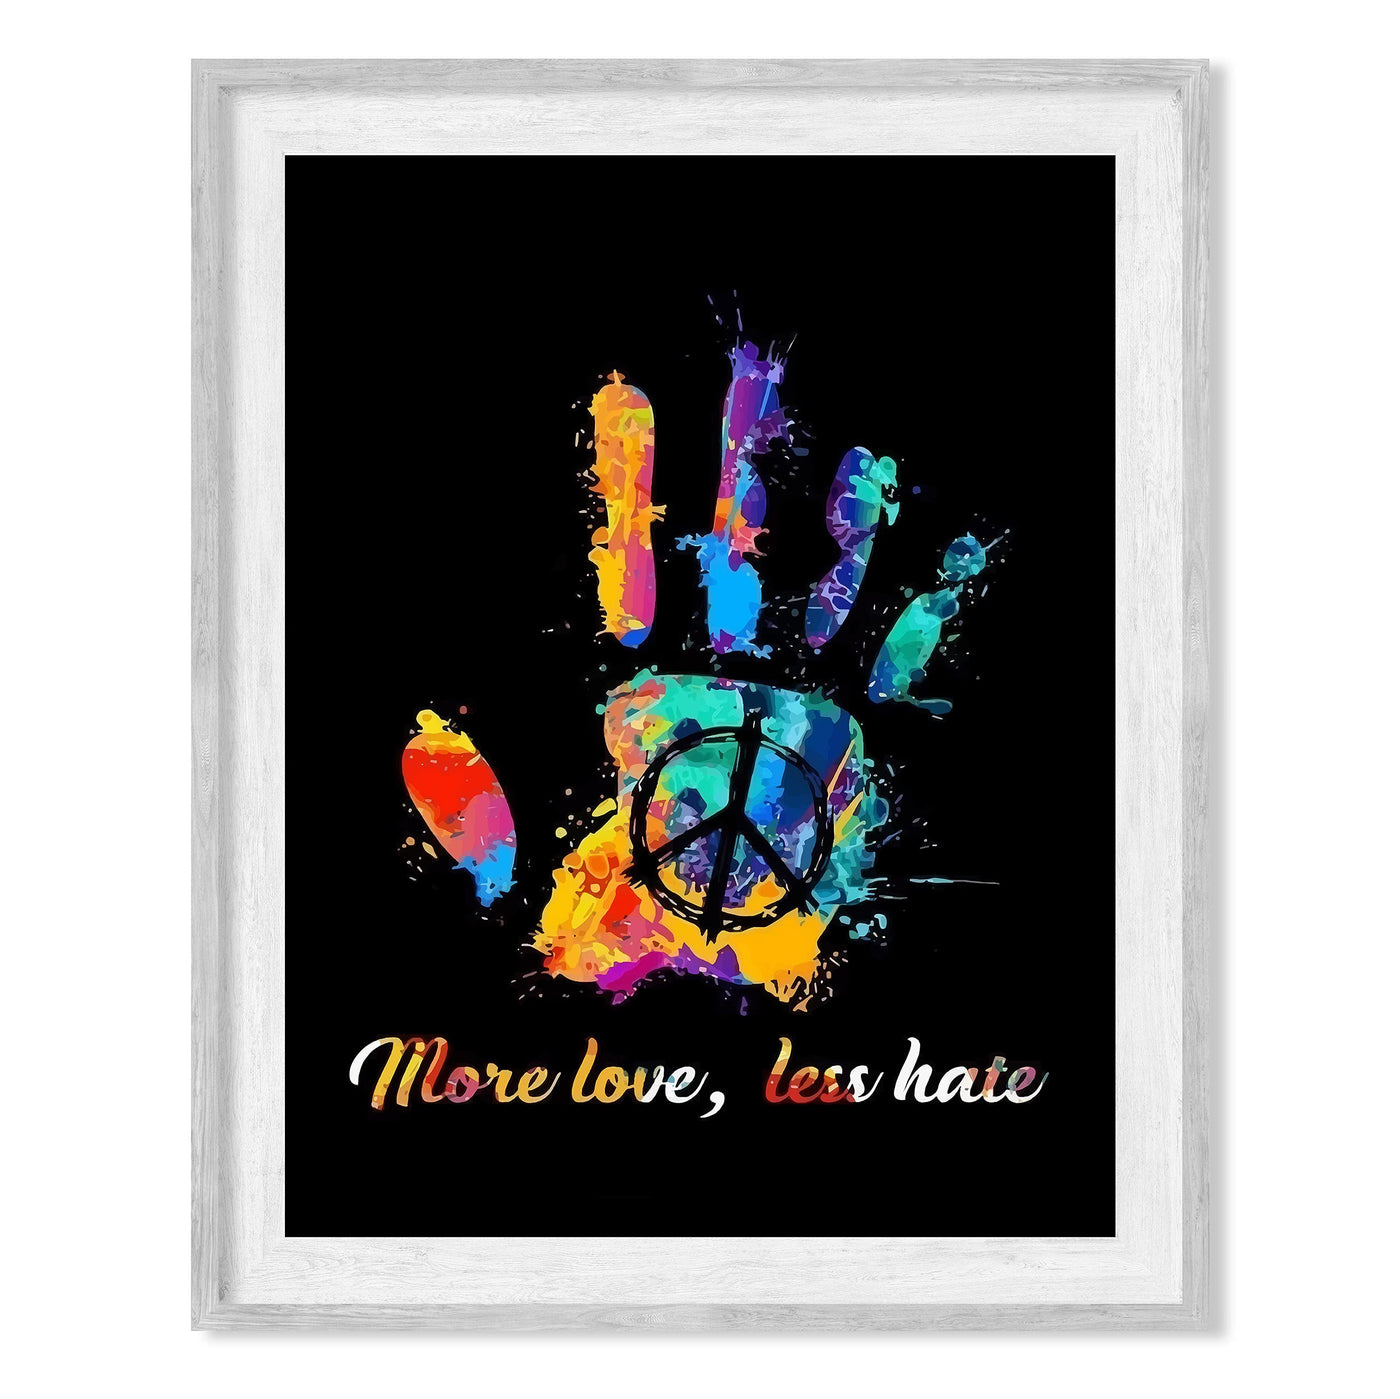 More Love, Less Hate Inspirational Quotes Wall Art -10 x 8" Abstract Painting Design Hand Print w/Peace Sign- Ready to Frame. Retro Decor for Home-Office-Studio-Dorm-Zen Decor. Great Reminder!